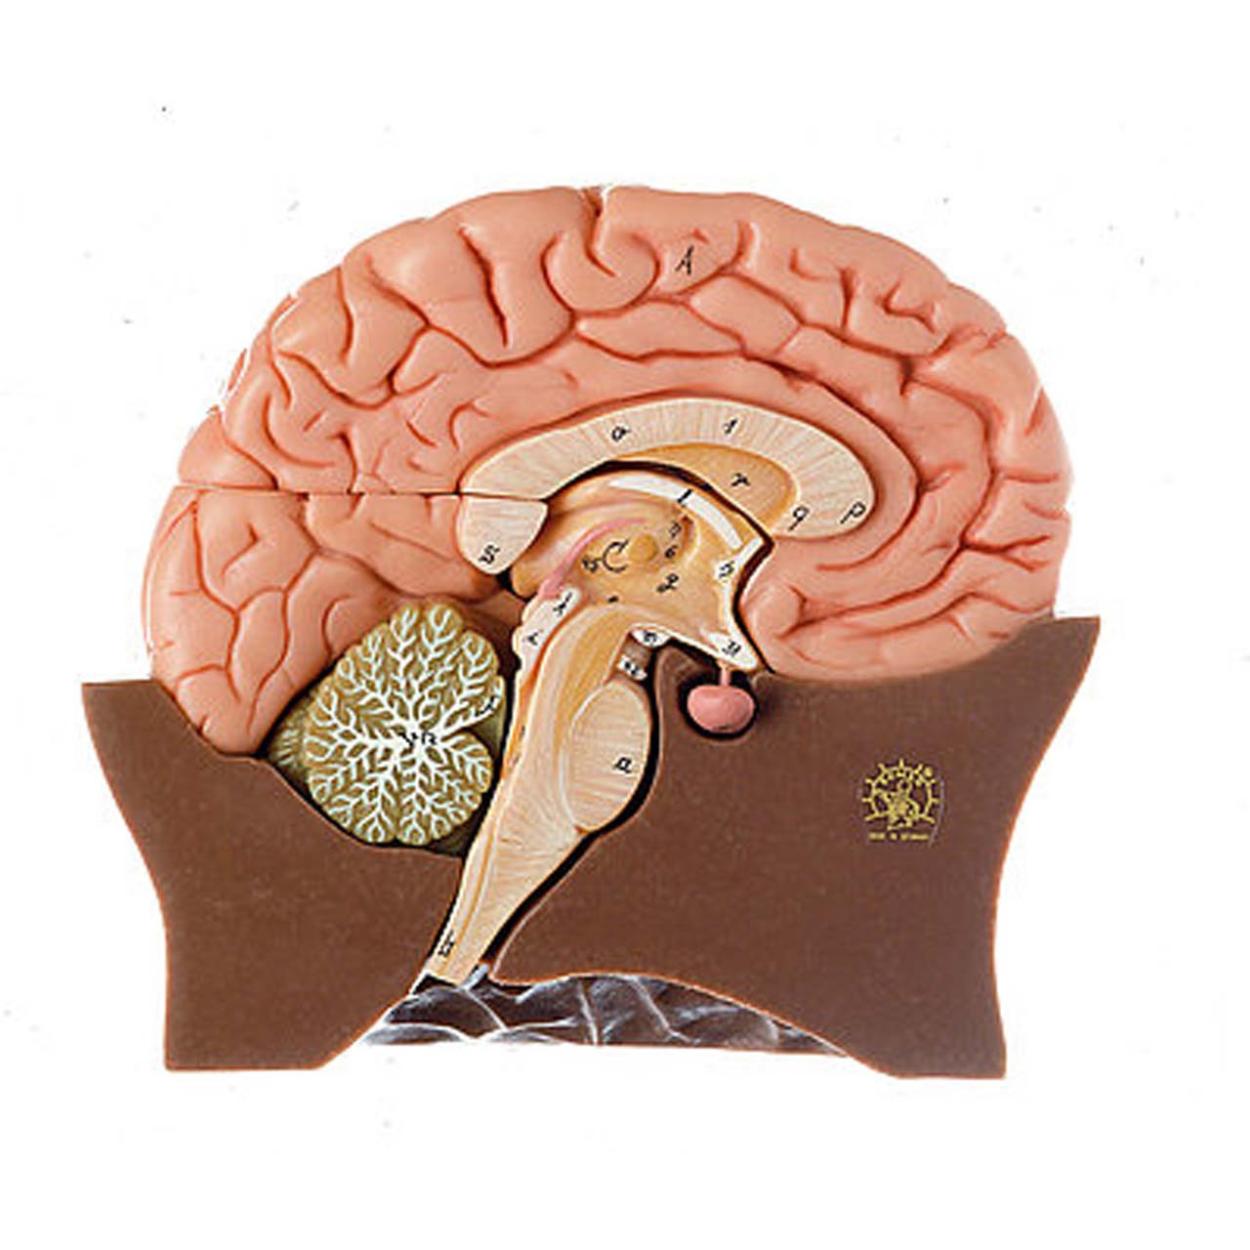 What Is The Frontal Lobe And What Does It Do?